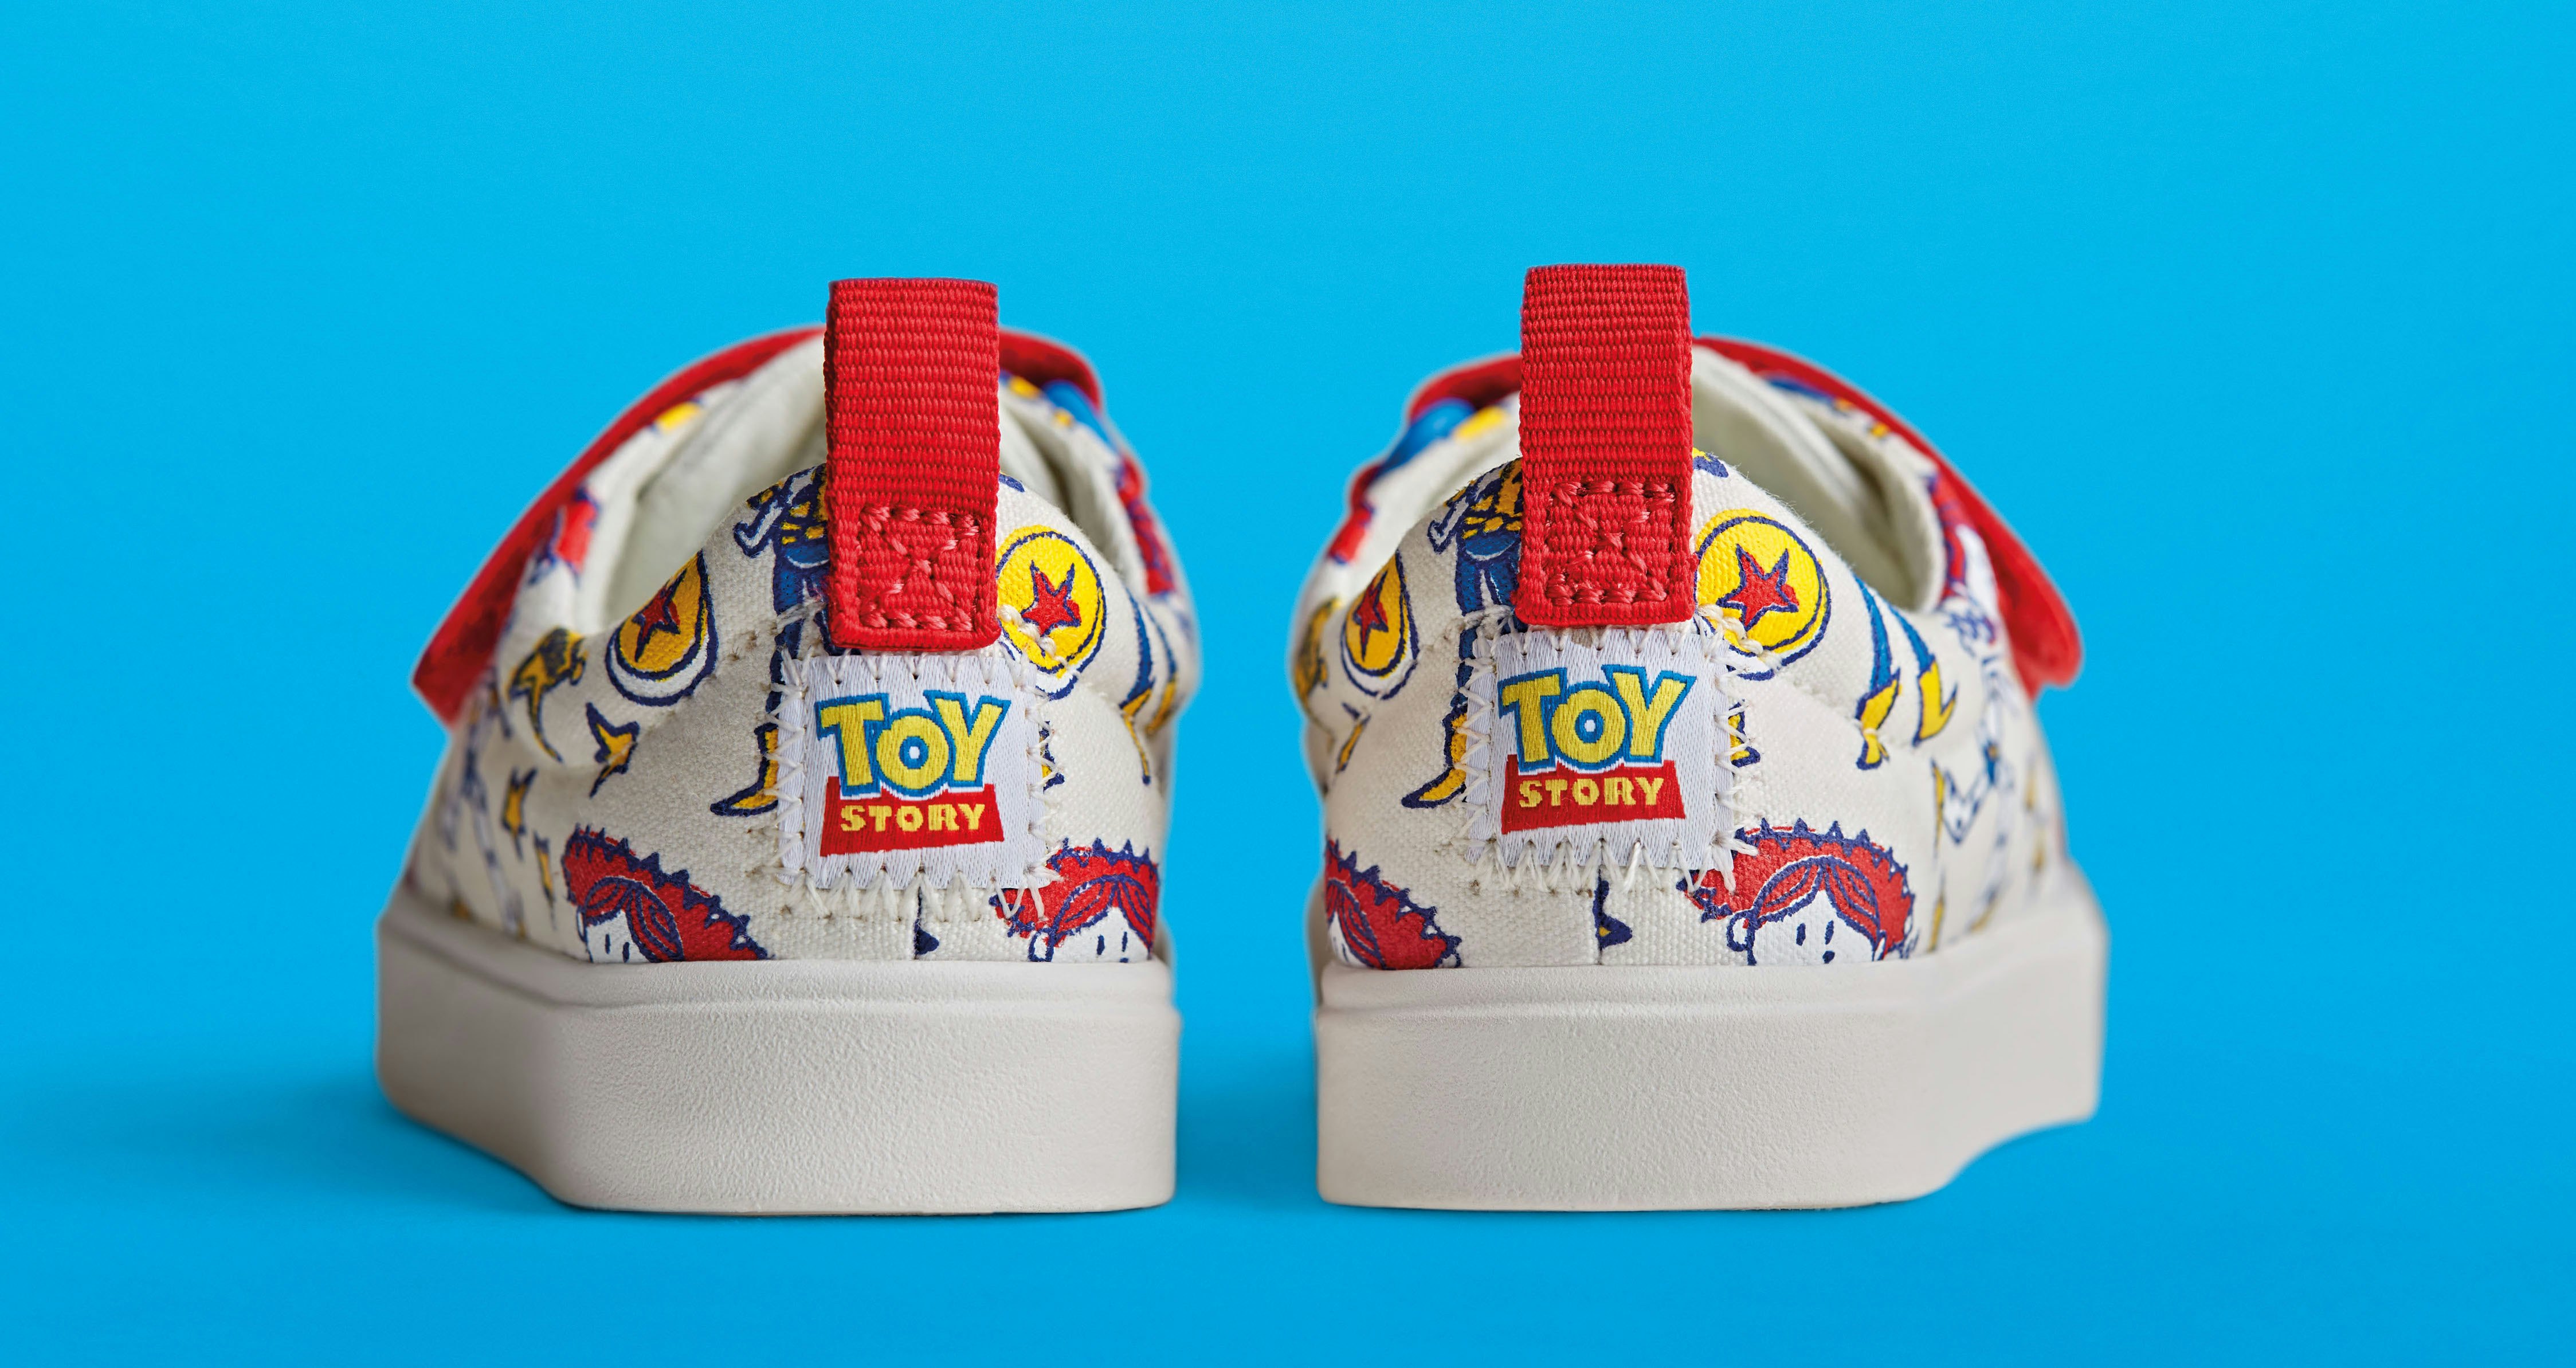 clarks shoes toy story